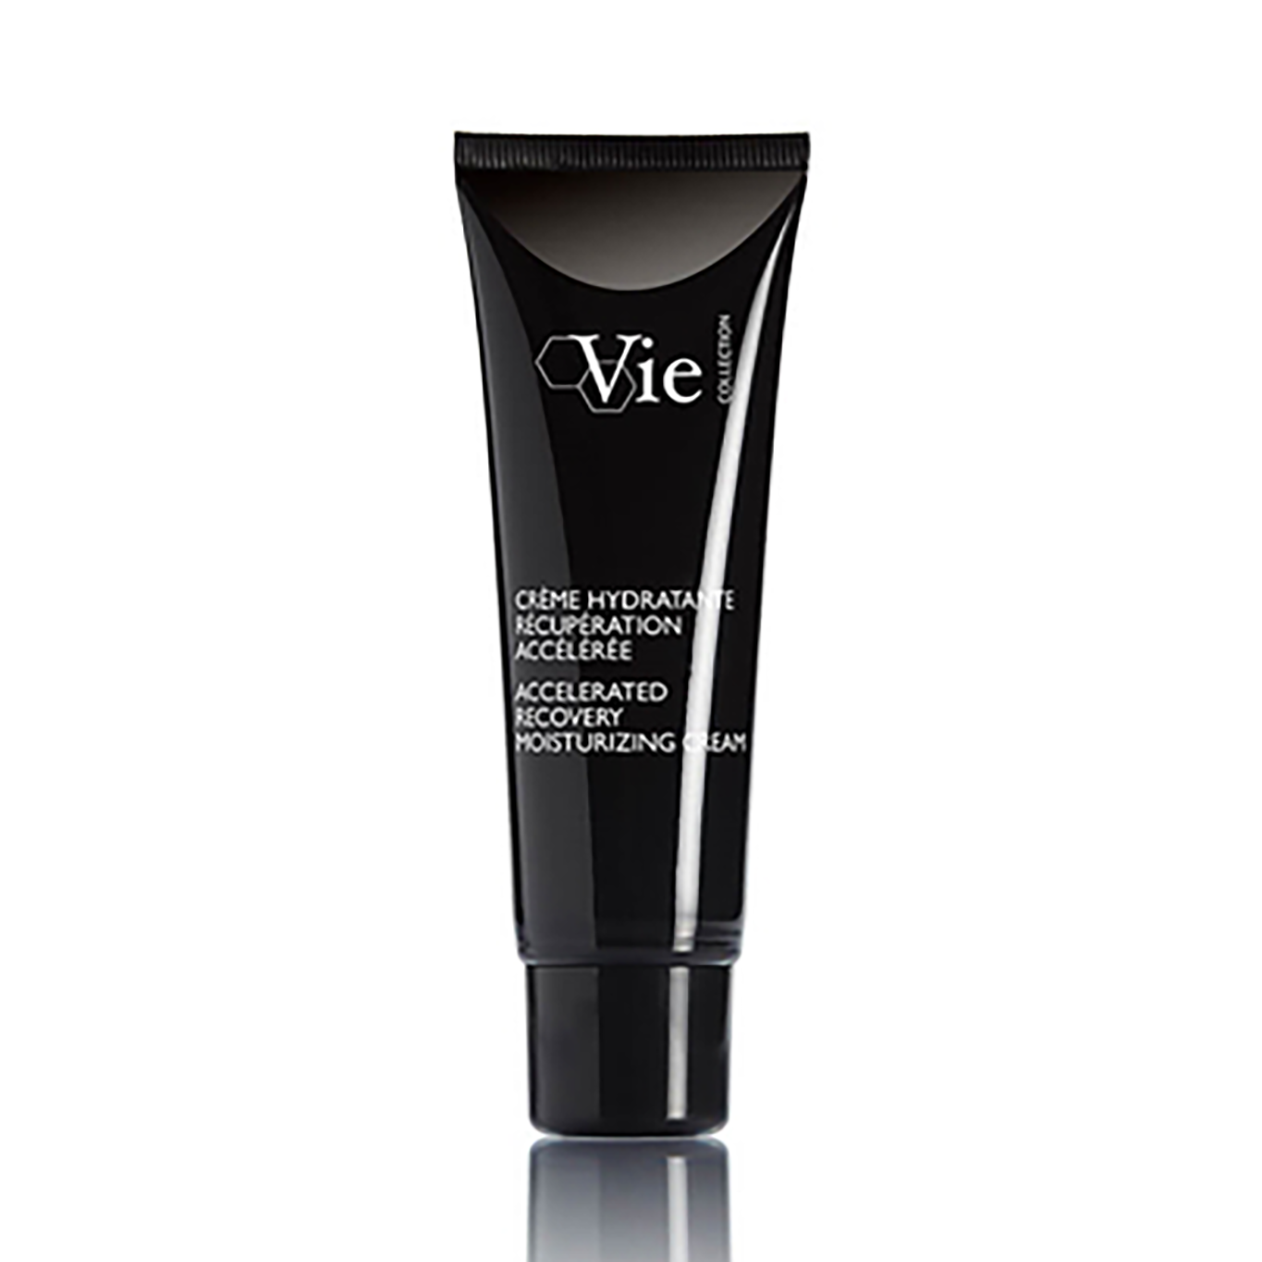 VIE Accelerated Recovery Cream